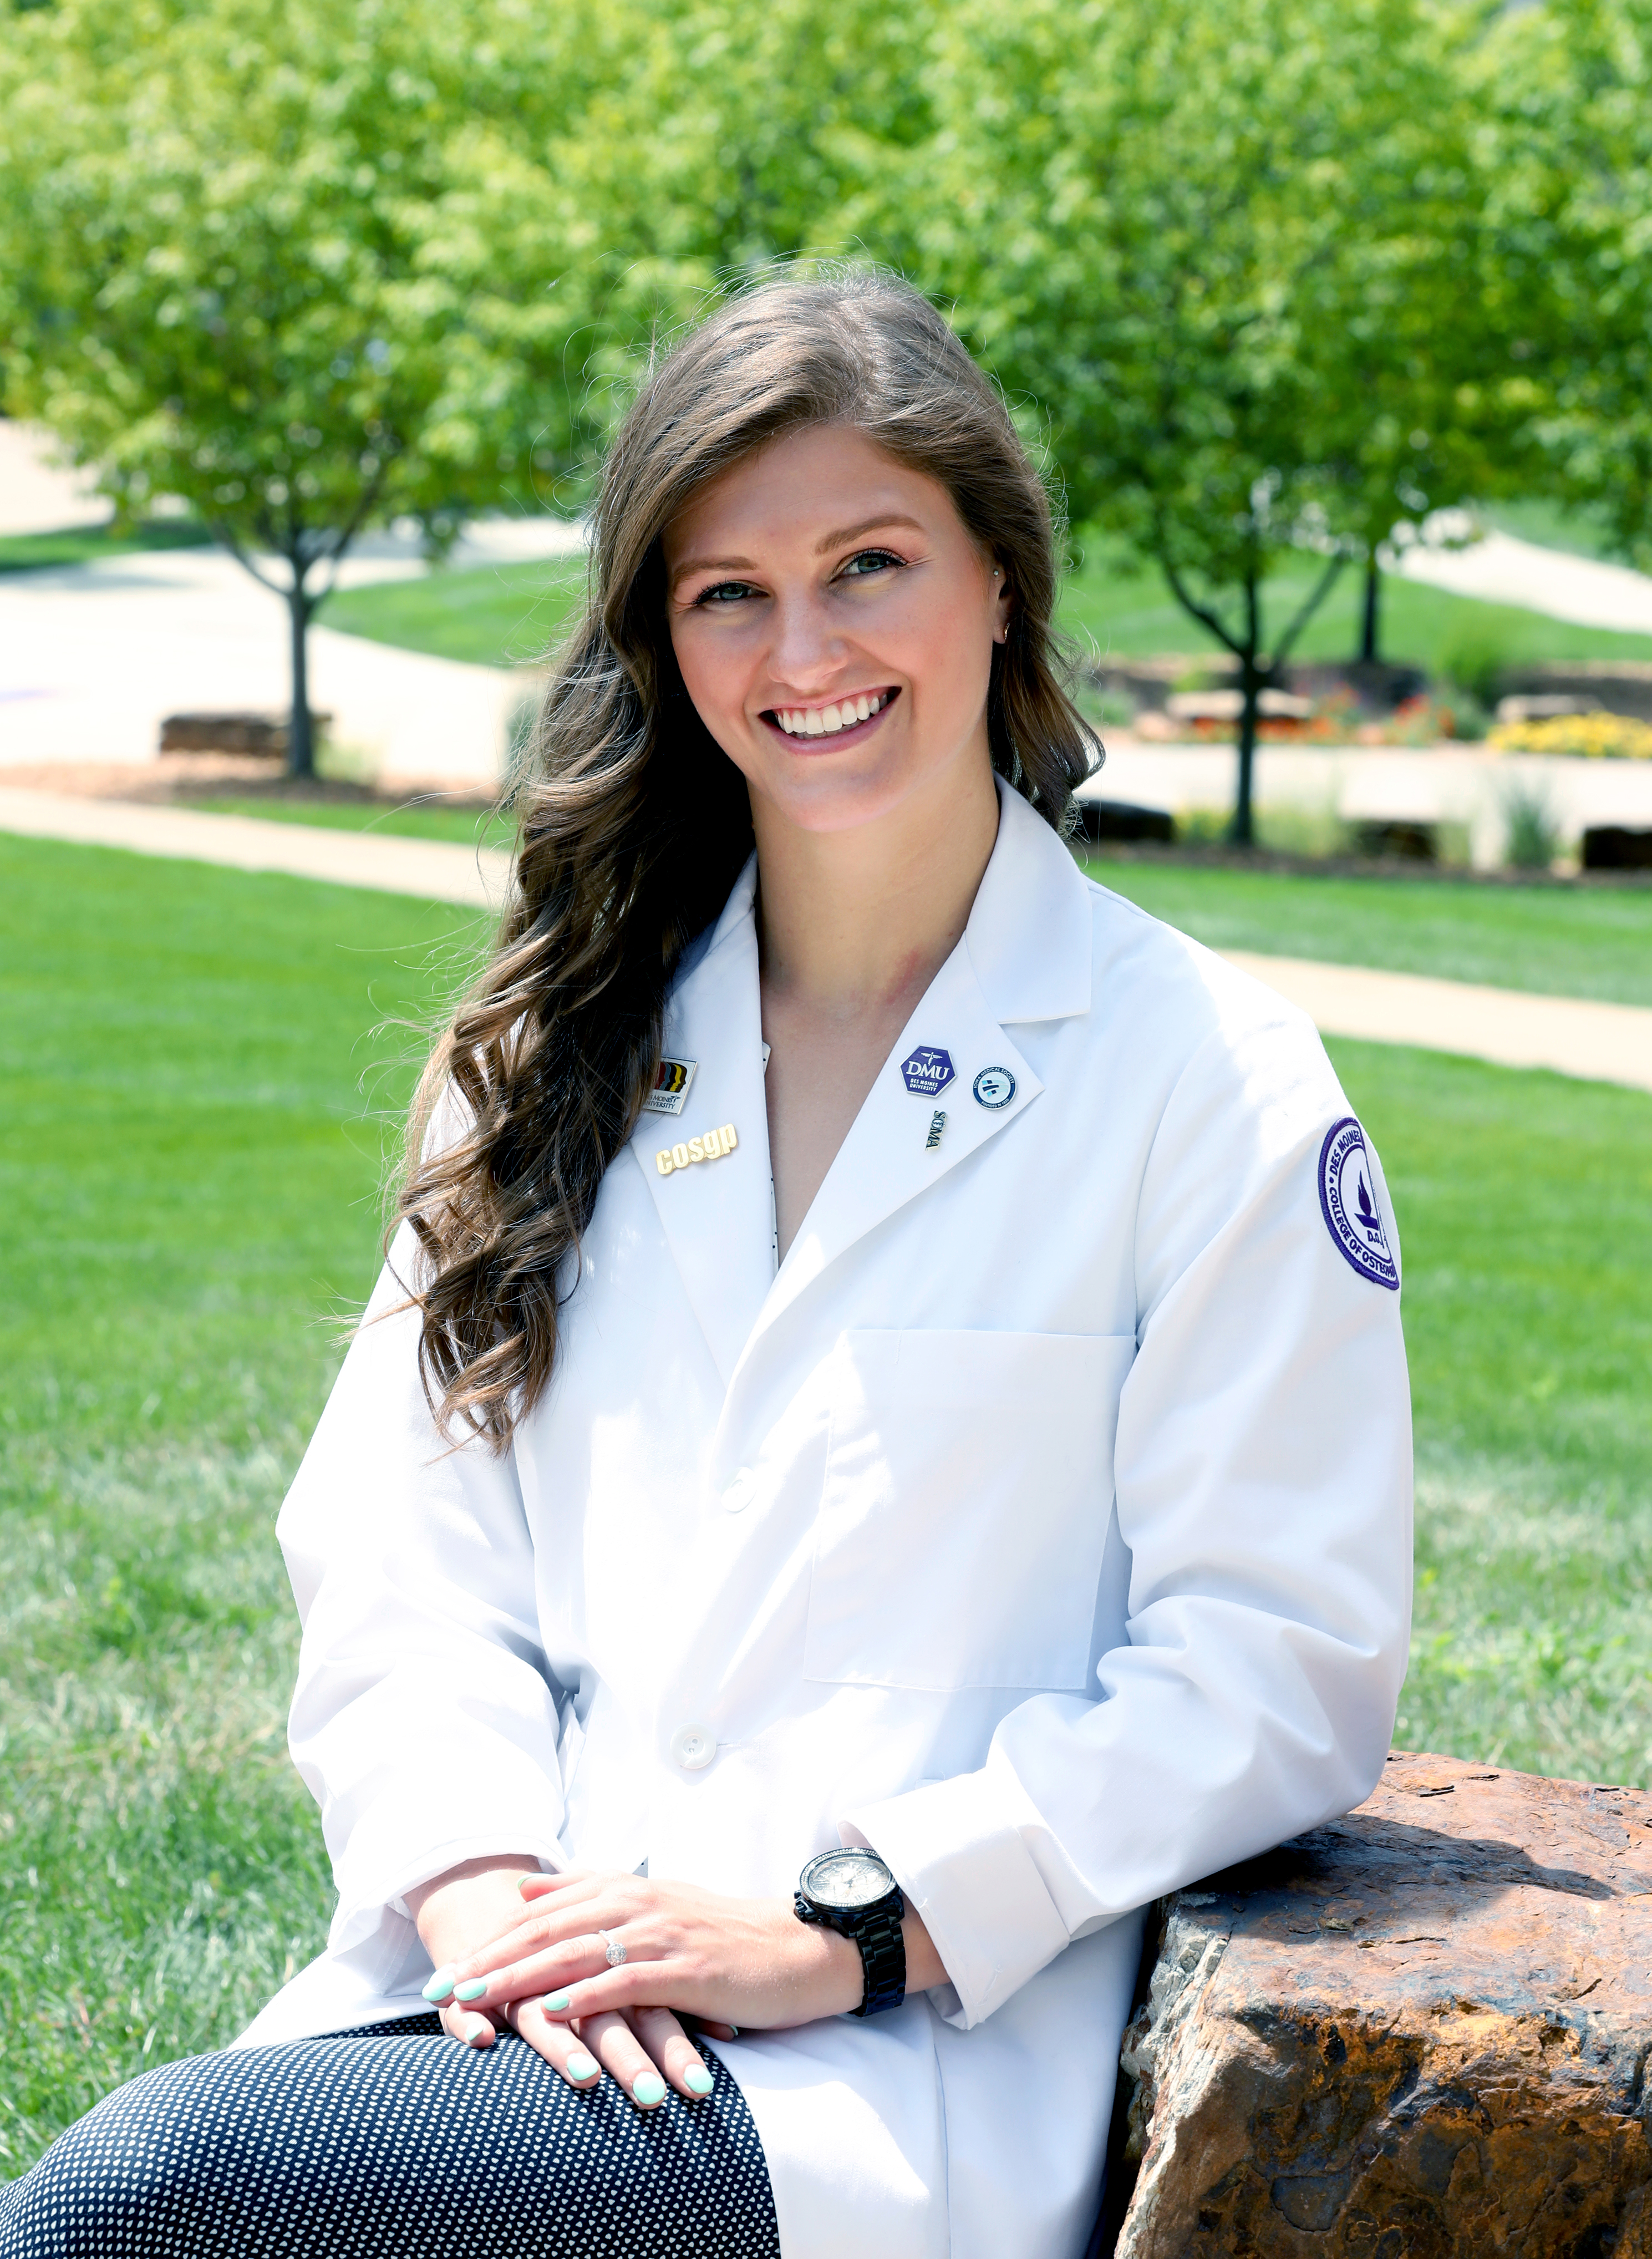 Des Moines University medical student Sydney Stanley led efforts to create a student network to serve local health care personnel.